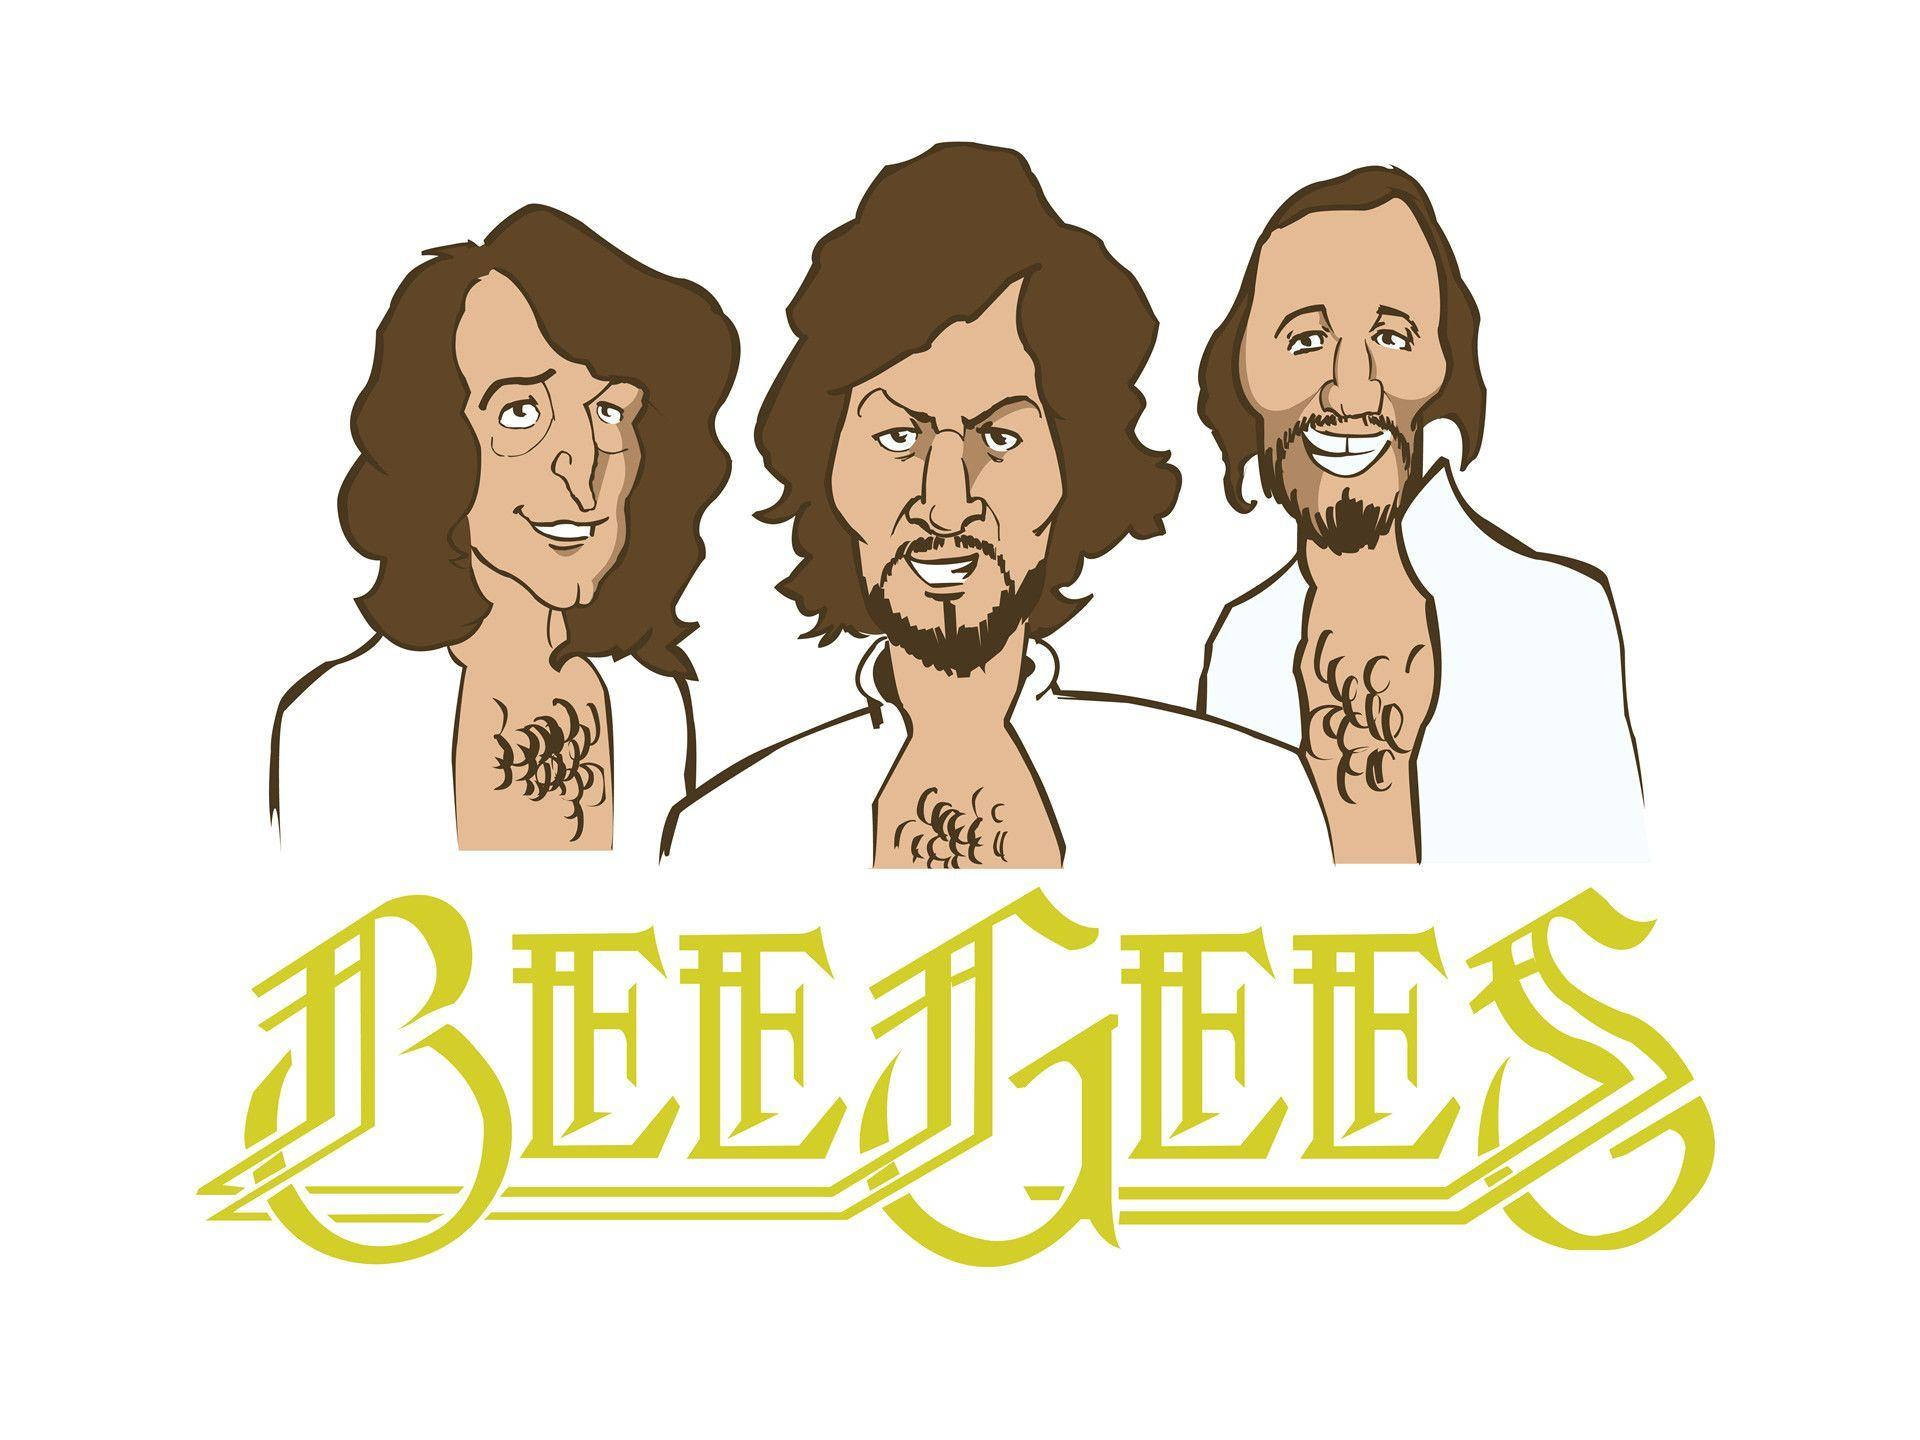 Bee Gees Musical Group Vector Art Picture